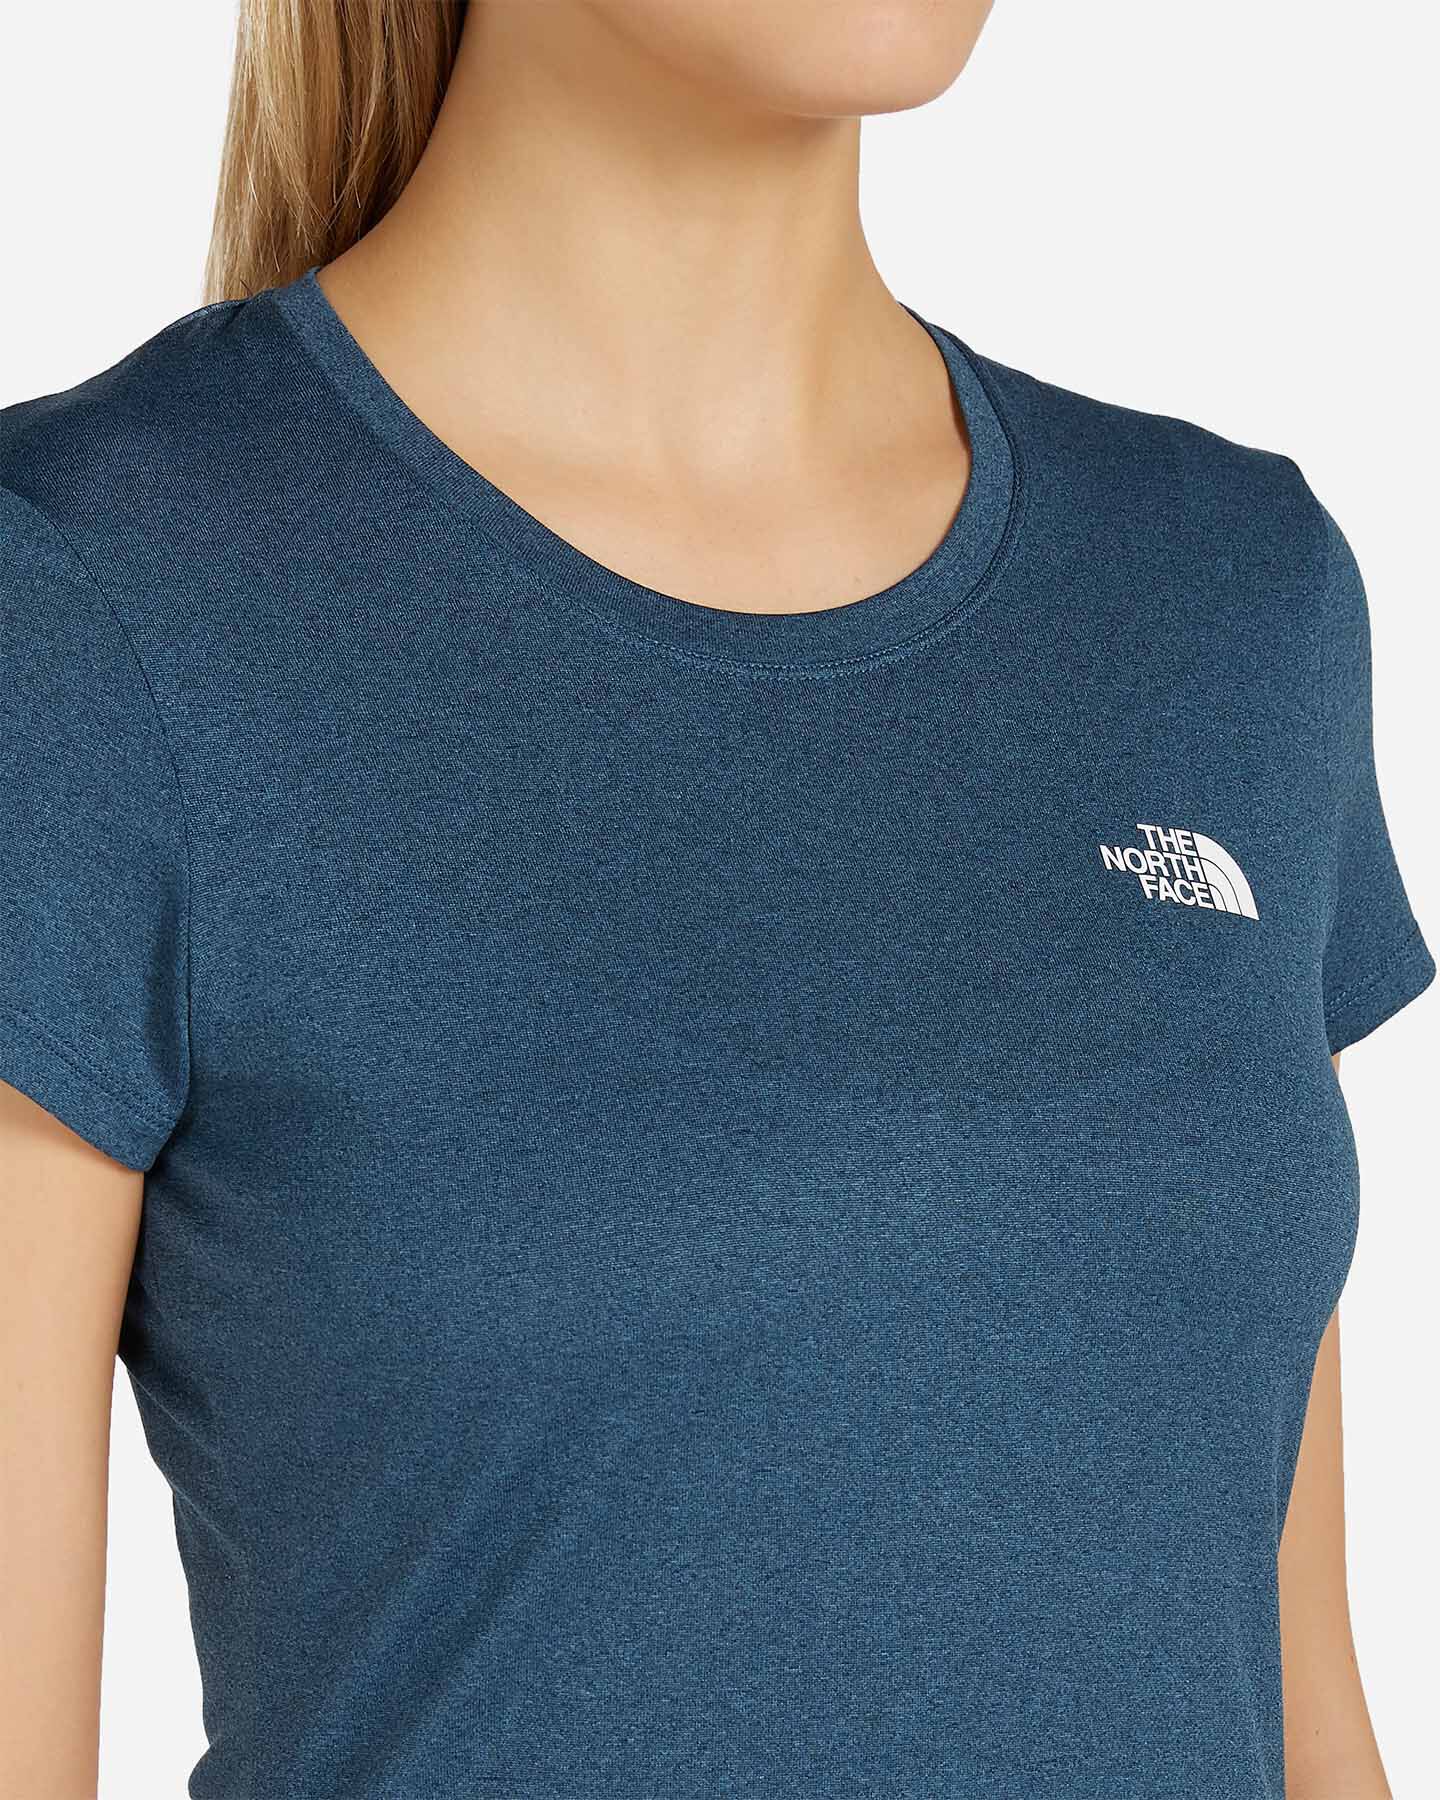  T-Shirt THE NORTH FACE REAXION AMP W S5535556 scatto 4